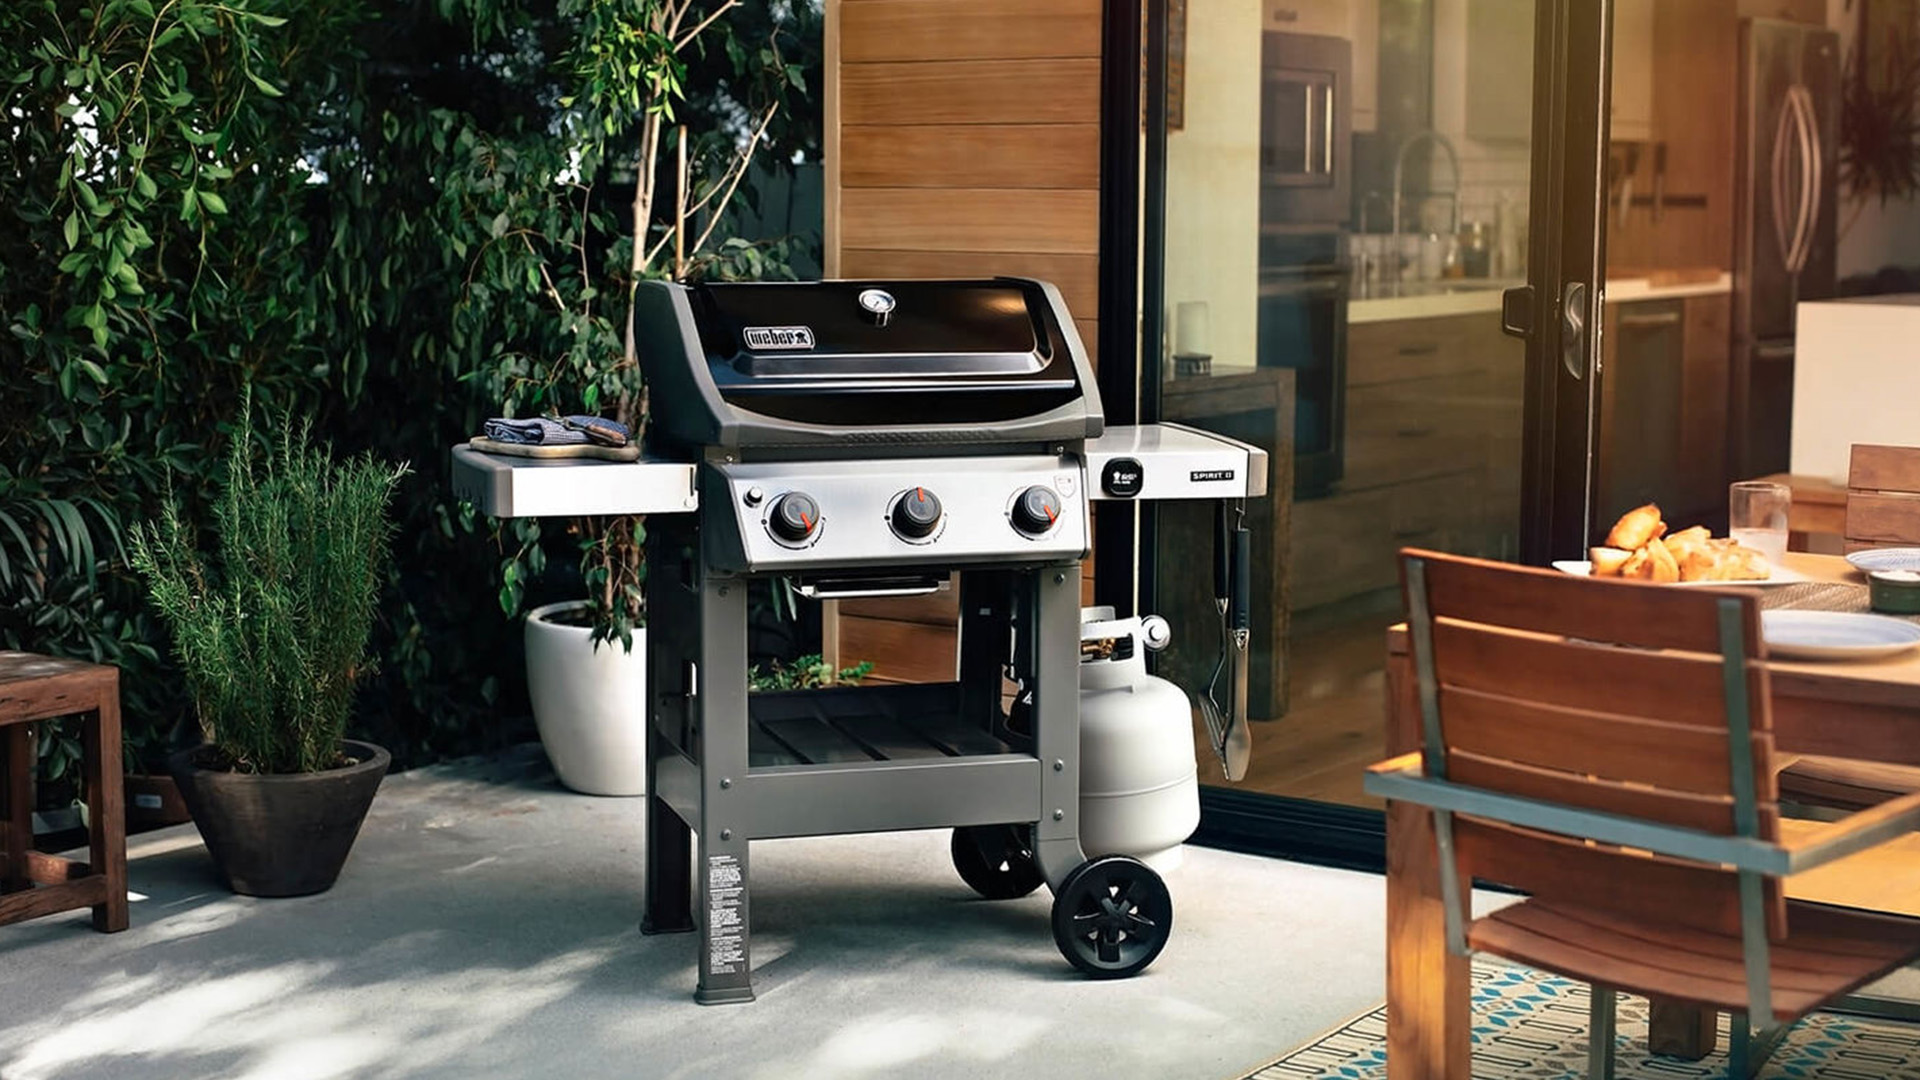 Weber Spirit Ii E 310 Gas Grill Review Top Ten Reviews,Best Sheets To Buy On Amazon